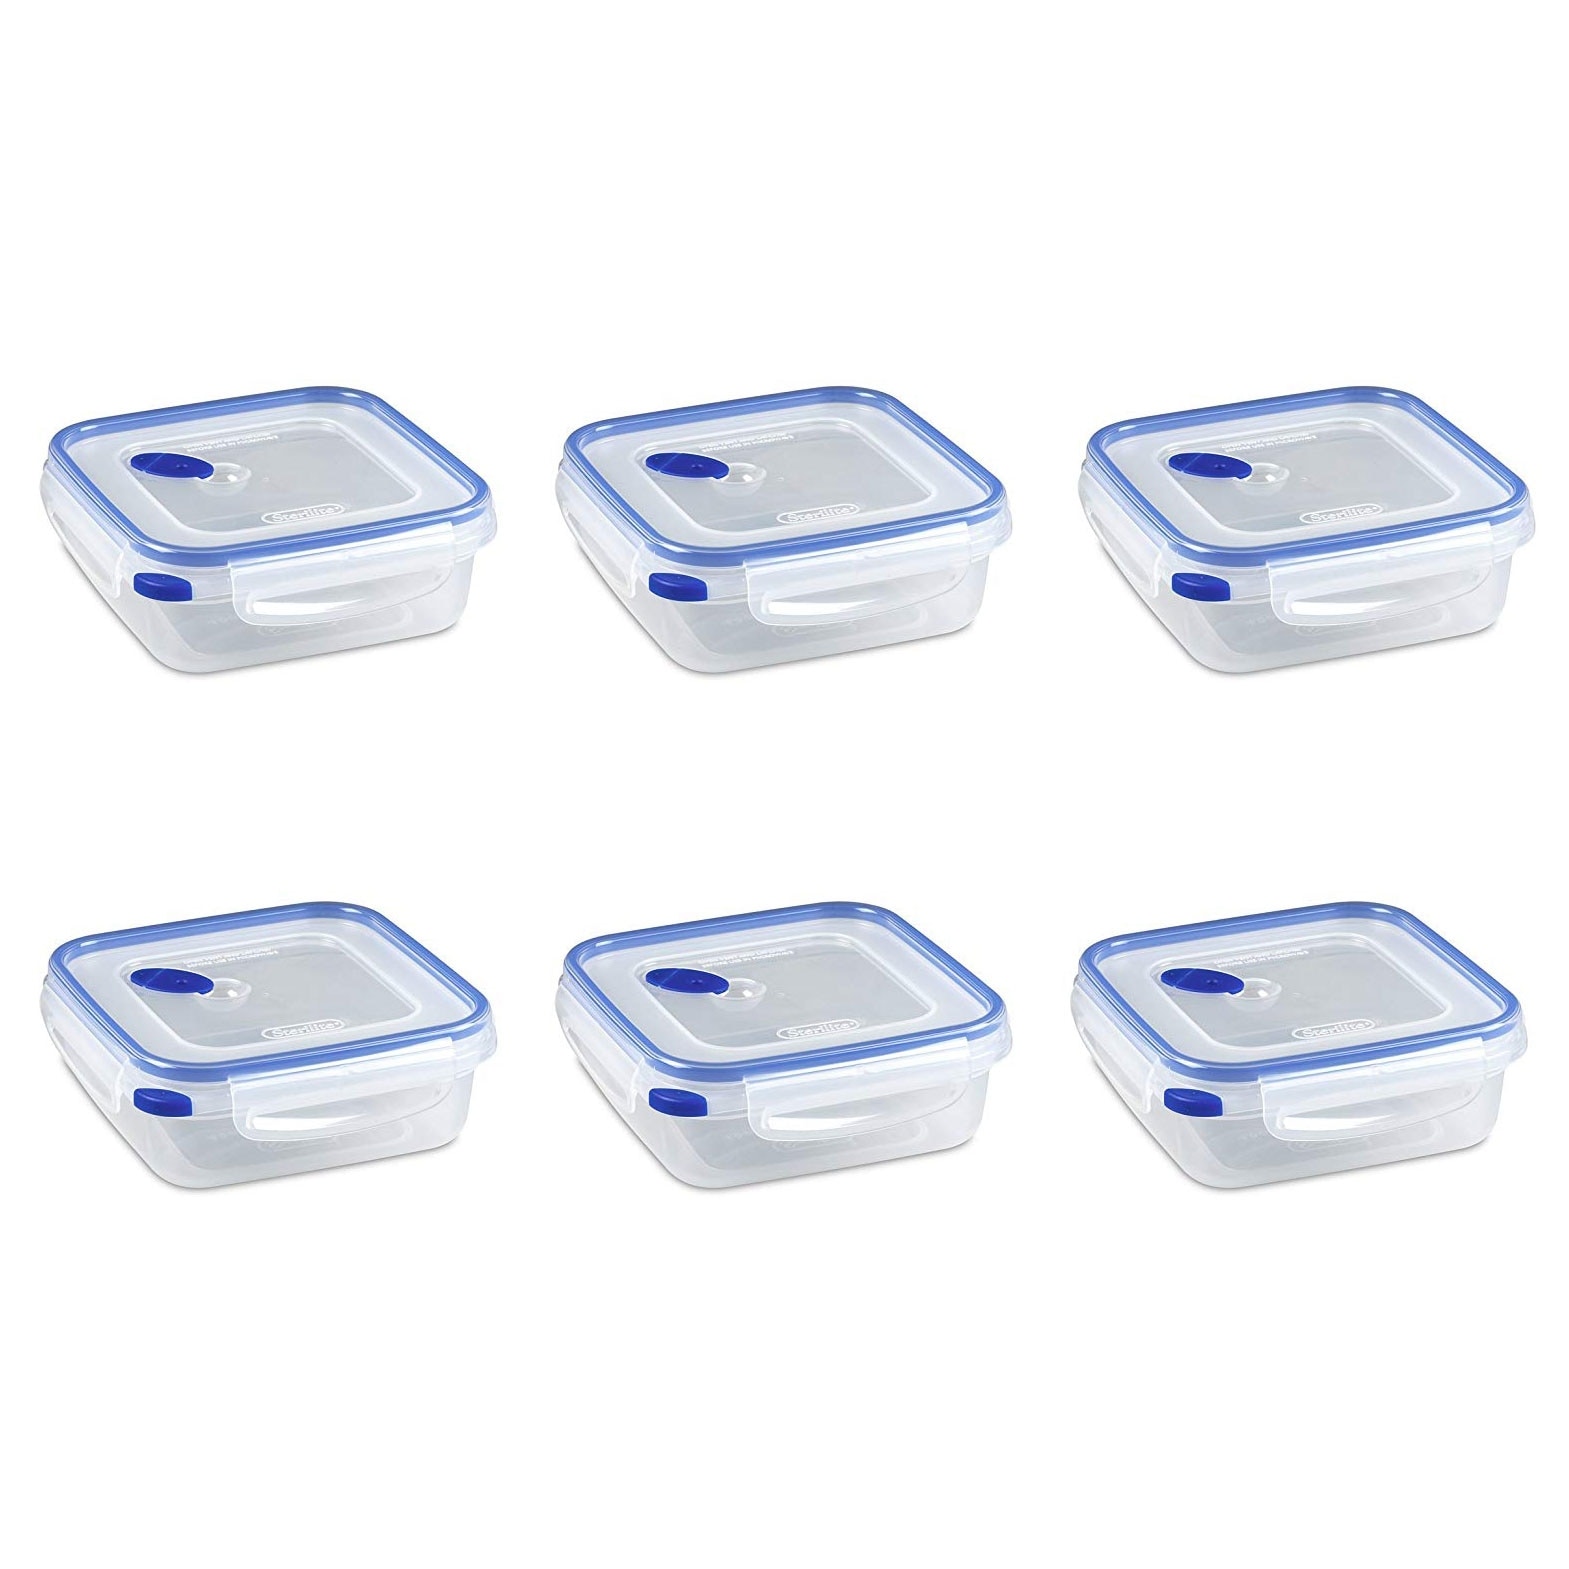 https://ak1.ostkcdn.com/images/products/is/images/direct/dfb1d645a8248295293e5b22bb67ed34071a175c/Sterilite-4.0-Cup-Square-Ultra-Seal-Food-Storage-Container%2C-Blue-%286-Pack%29.jpg